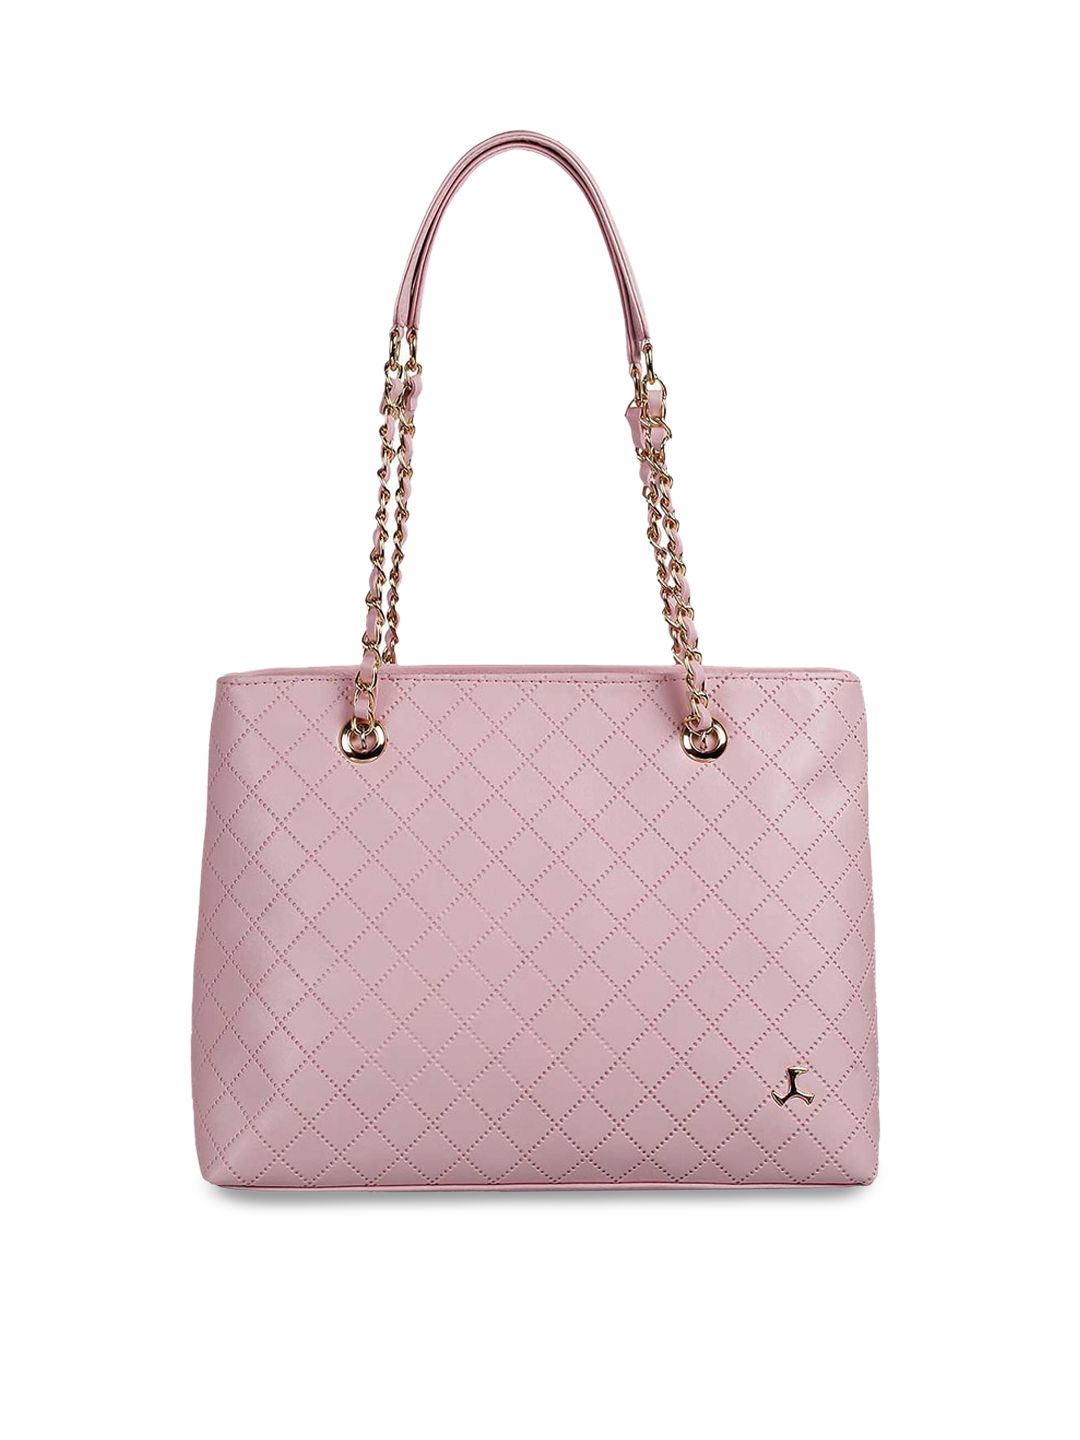 Mochi Pink Textured PU Structured Shoulder Bag with Quilted Price in India